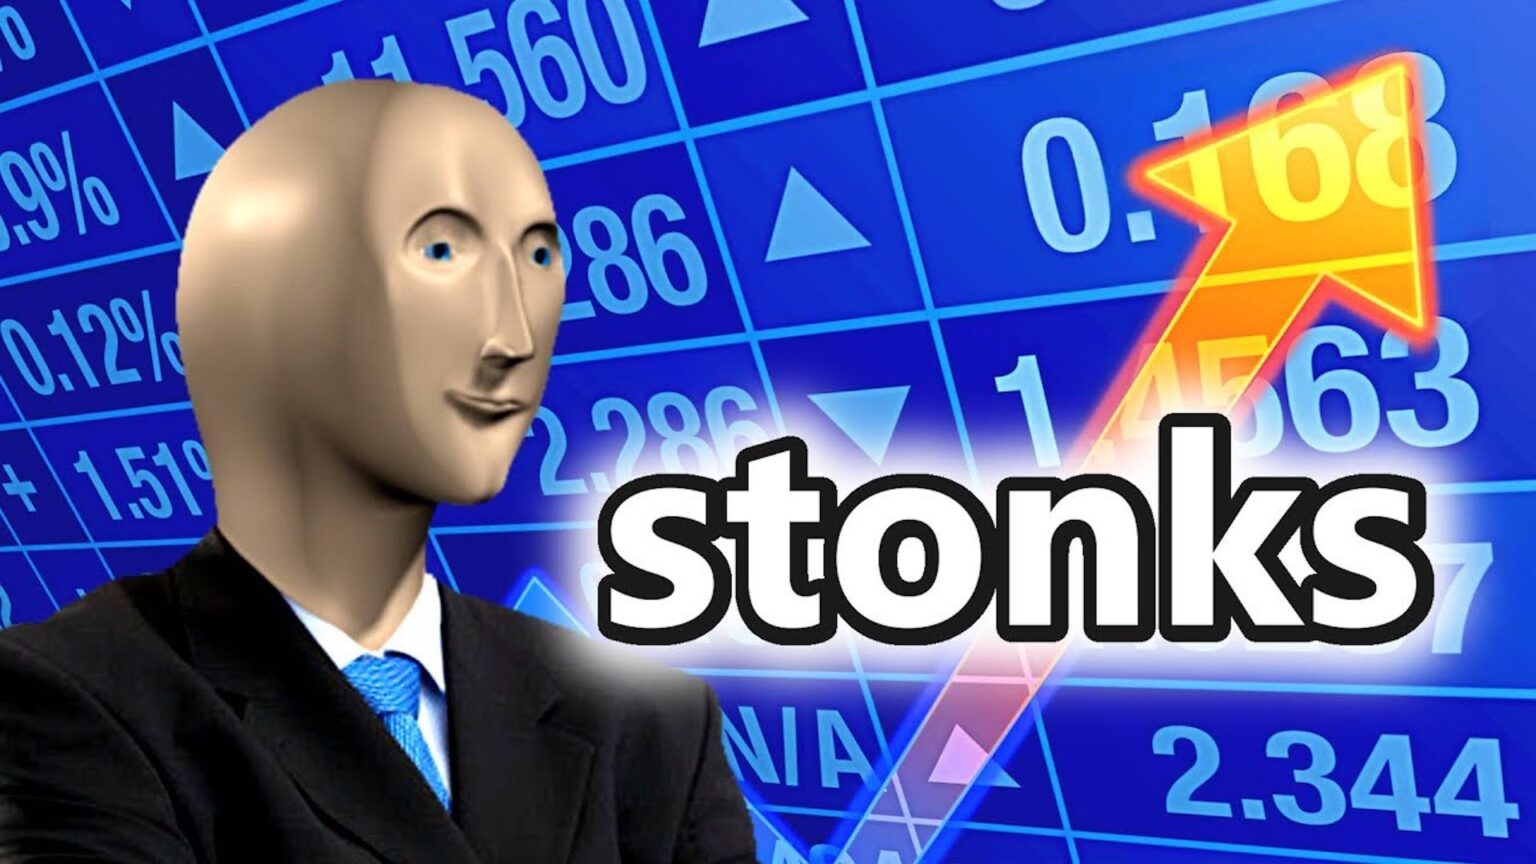 GameStop is thriving heading into the weekend, thanks to Reddit. Check out all the funny memes about the company's stock price right here.